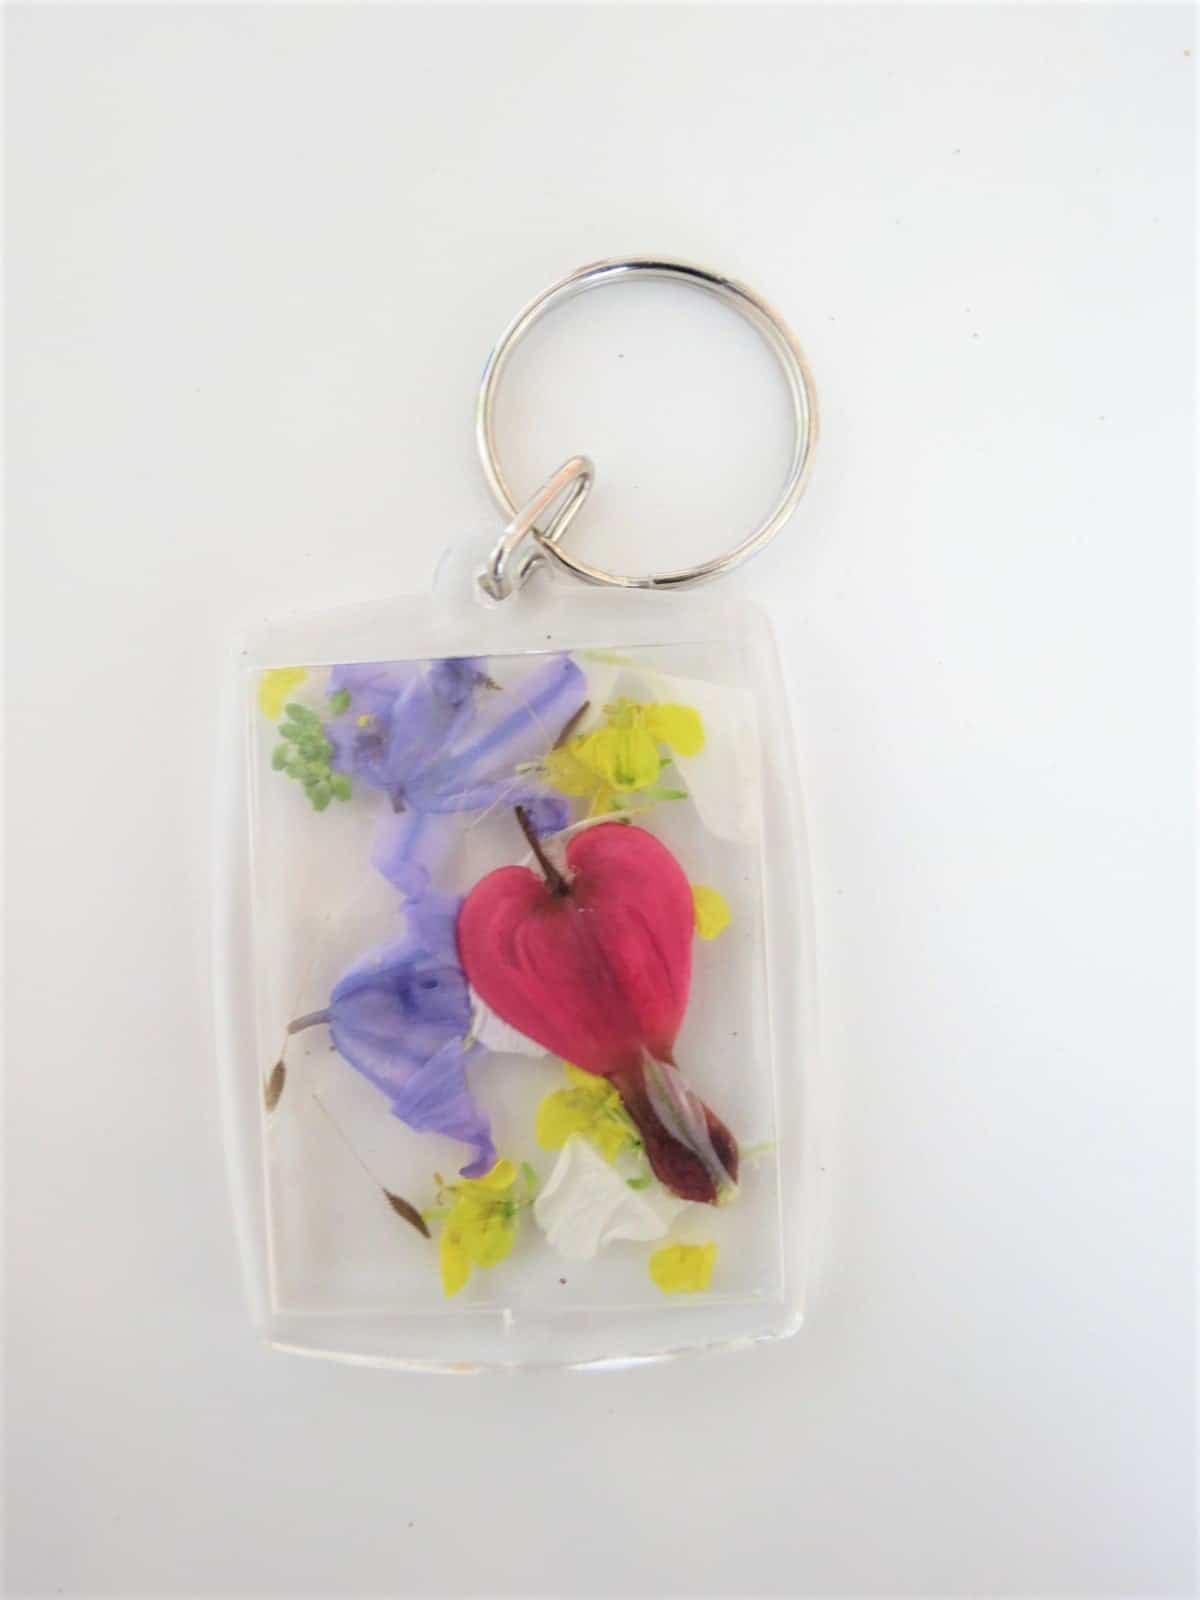 flower activity for kids. flowers in a keyring